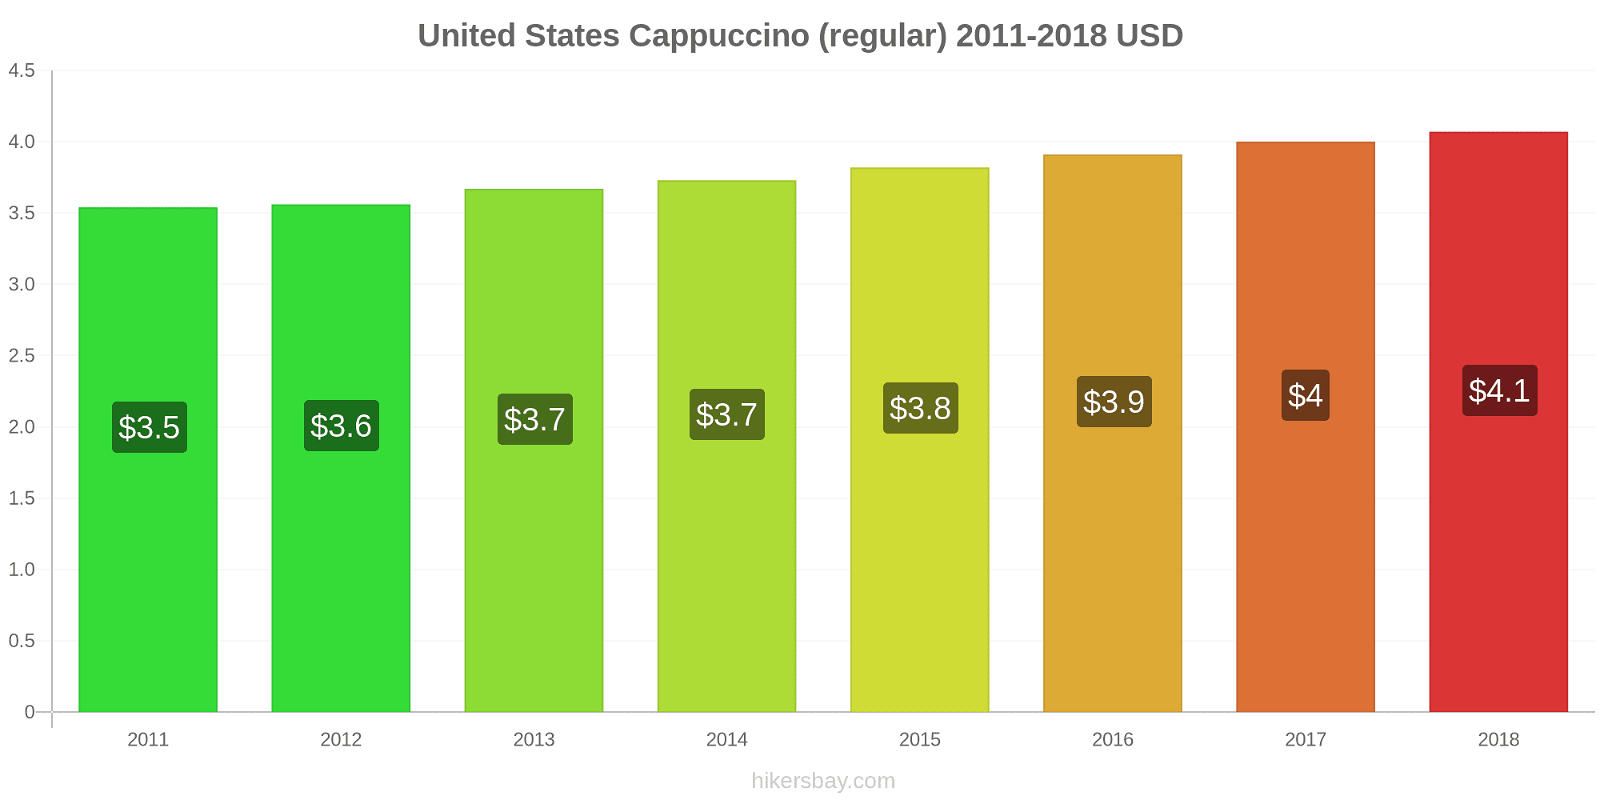 United States price changes Cappuccino hikersbay.com